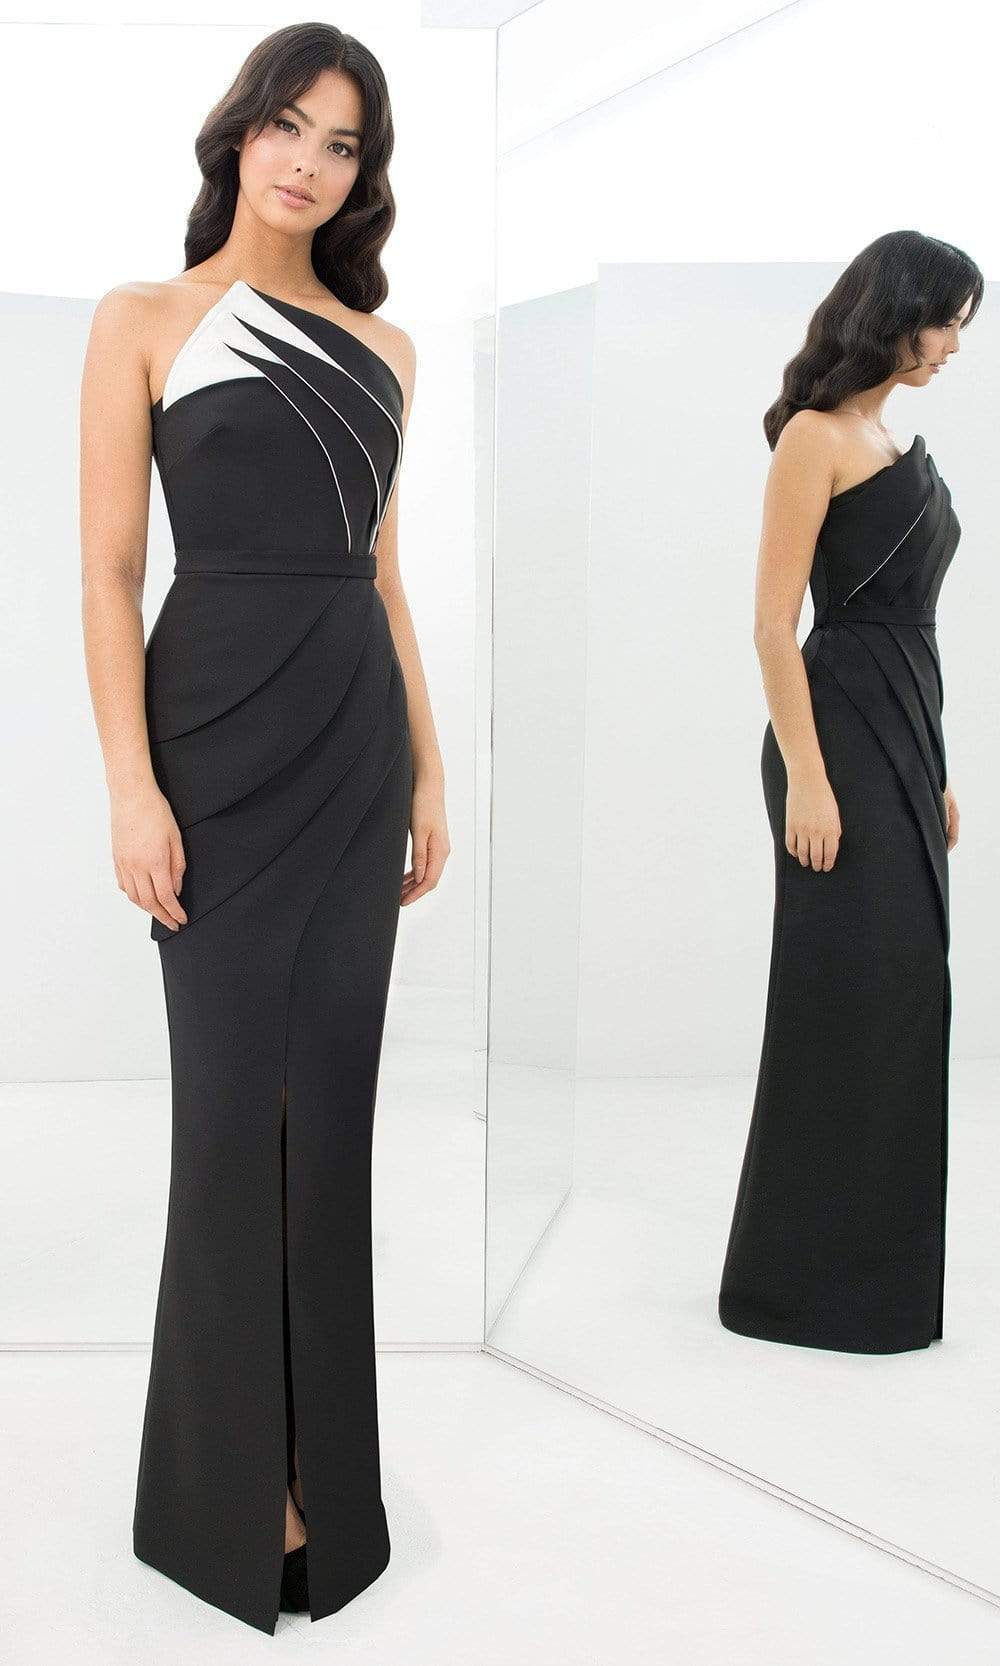 Alexander By Daymor - 1381 Strapless Pleated Sheath Dress With Slit Evening Dresses 00 / Black/White